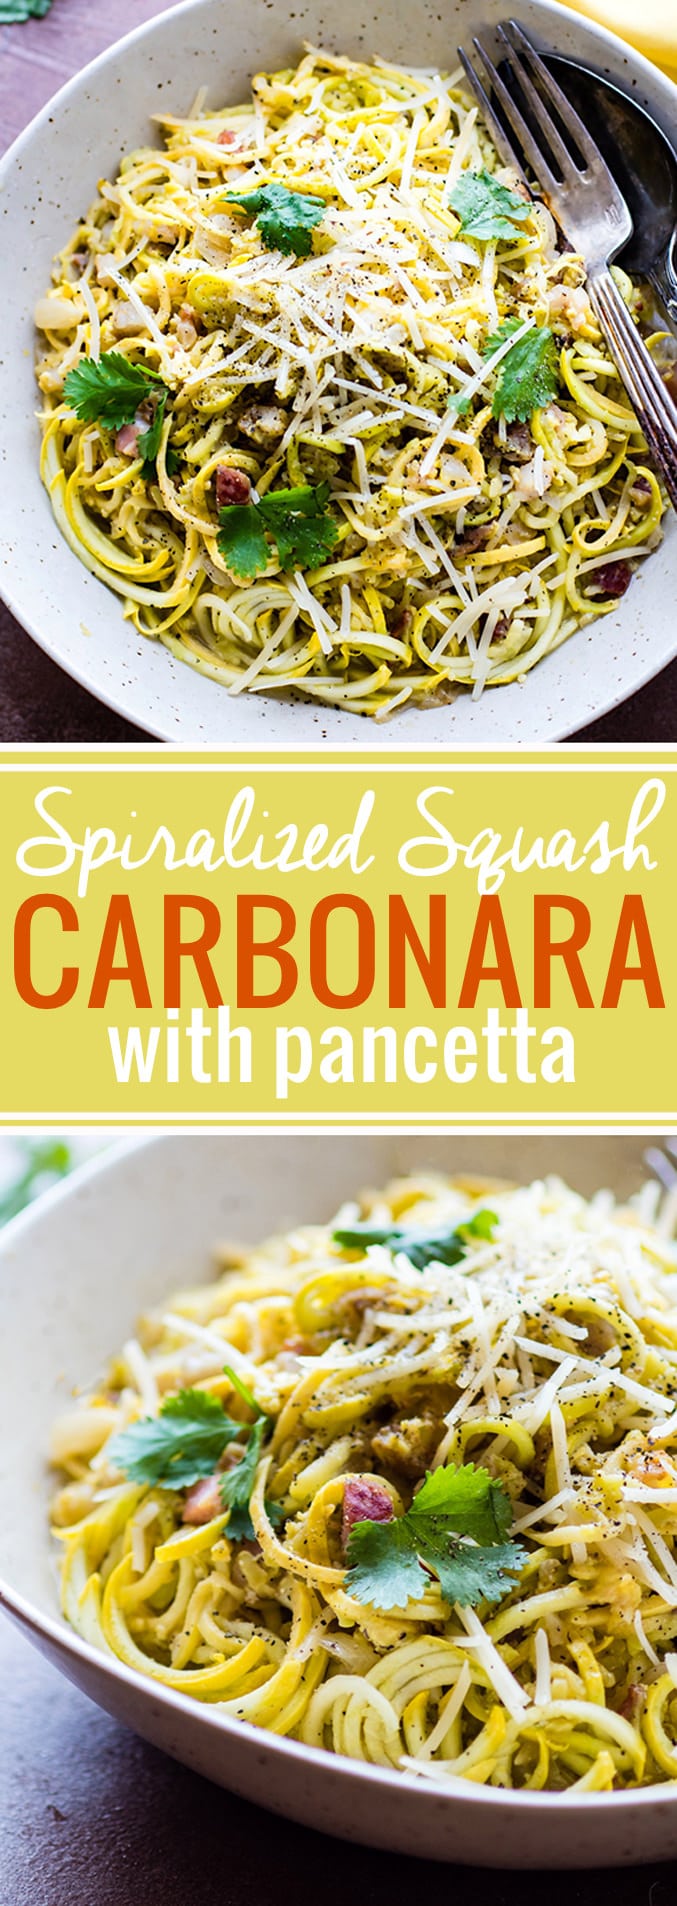 Delicious spiralized squash noodles, pan fried garlic and pancetta, and a creamy pasta carbonara sauce all tossed together. This low carb veggie pasta dish is super easy to make with a spiralizer. A light pasta carbonara comfort food dish that's naturally gluten free.  @cottercrunch